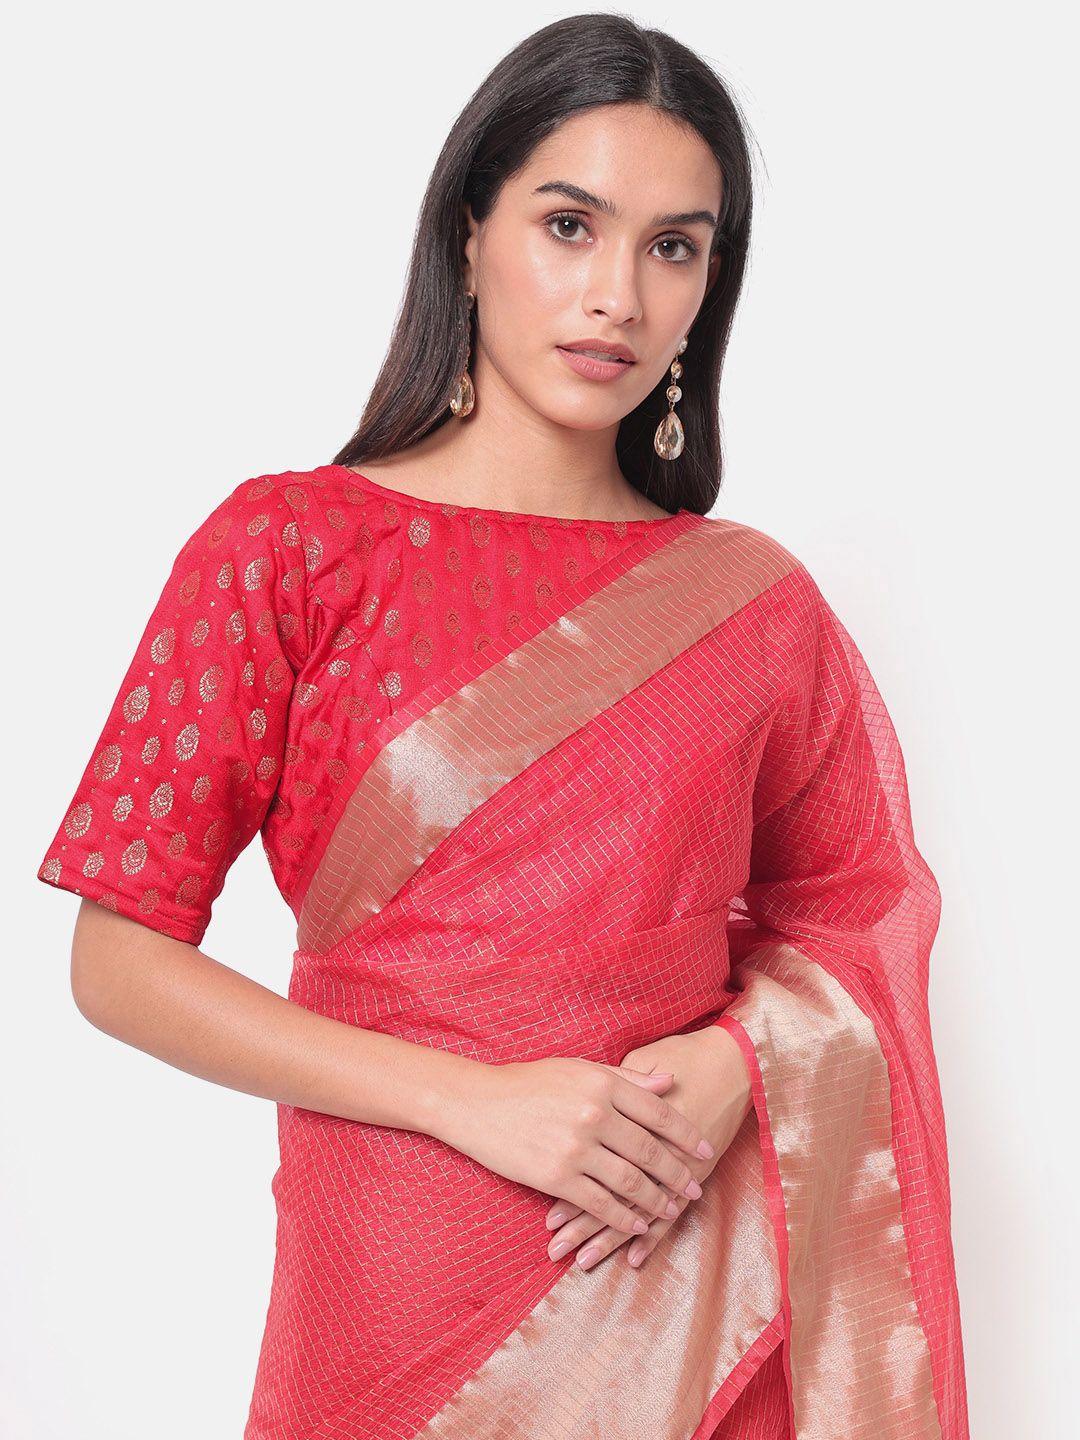 saaki women red & gold-colored printed fitted saree blouse